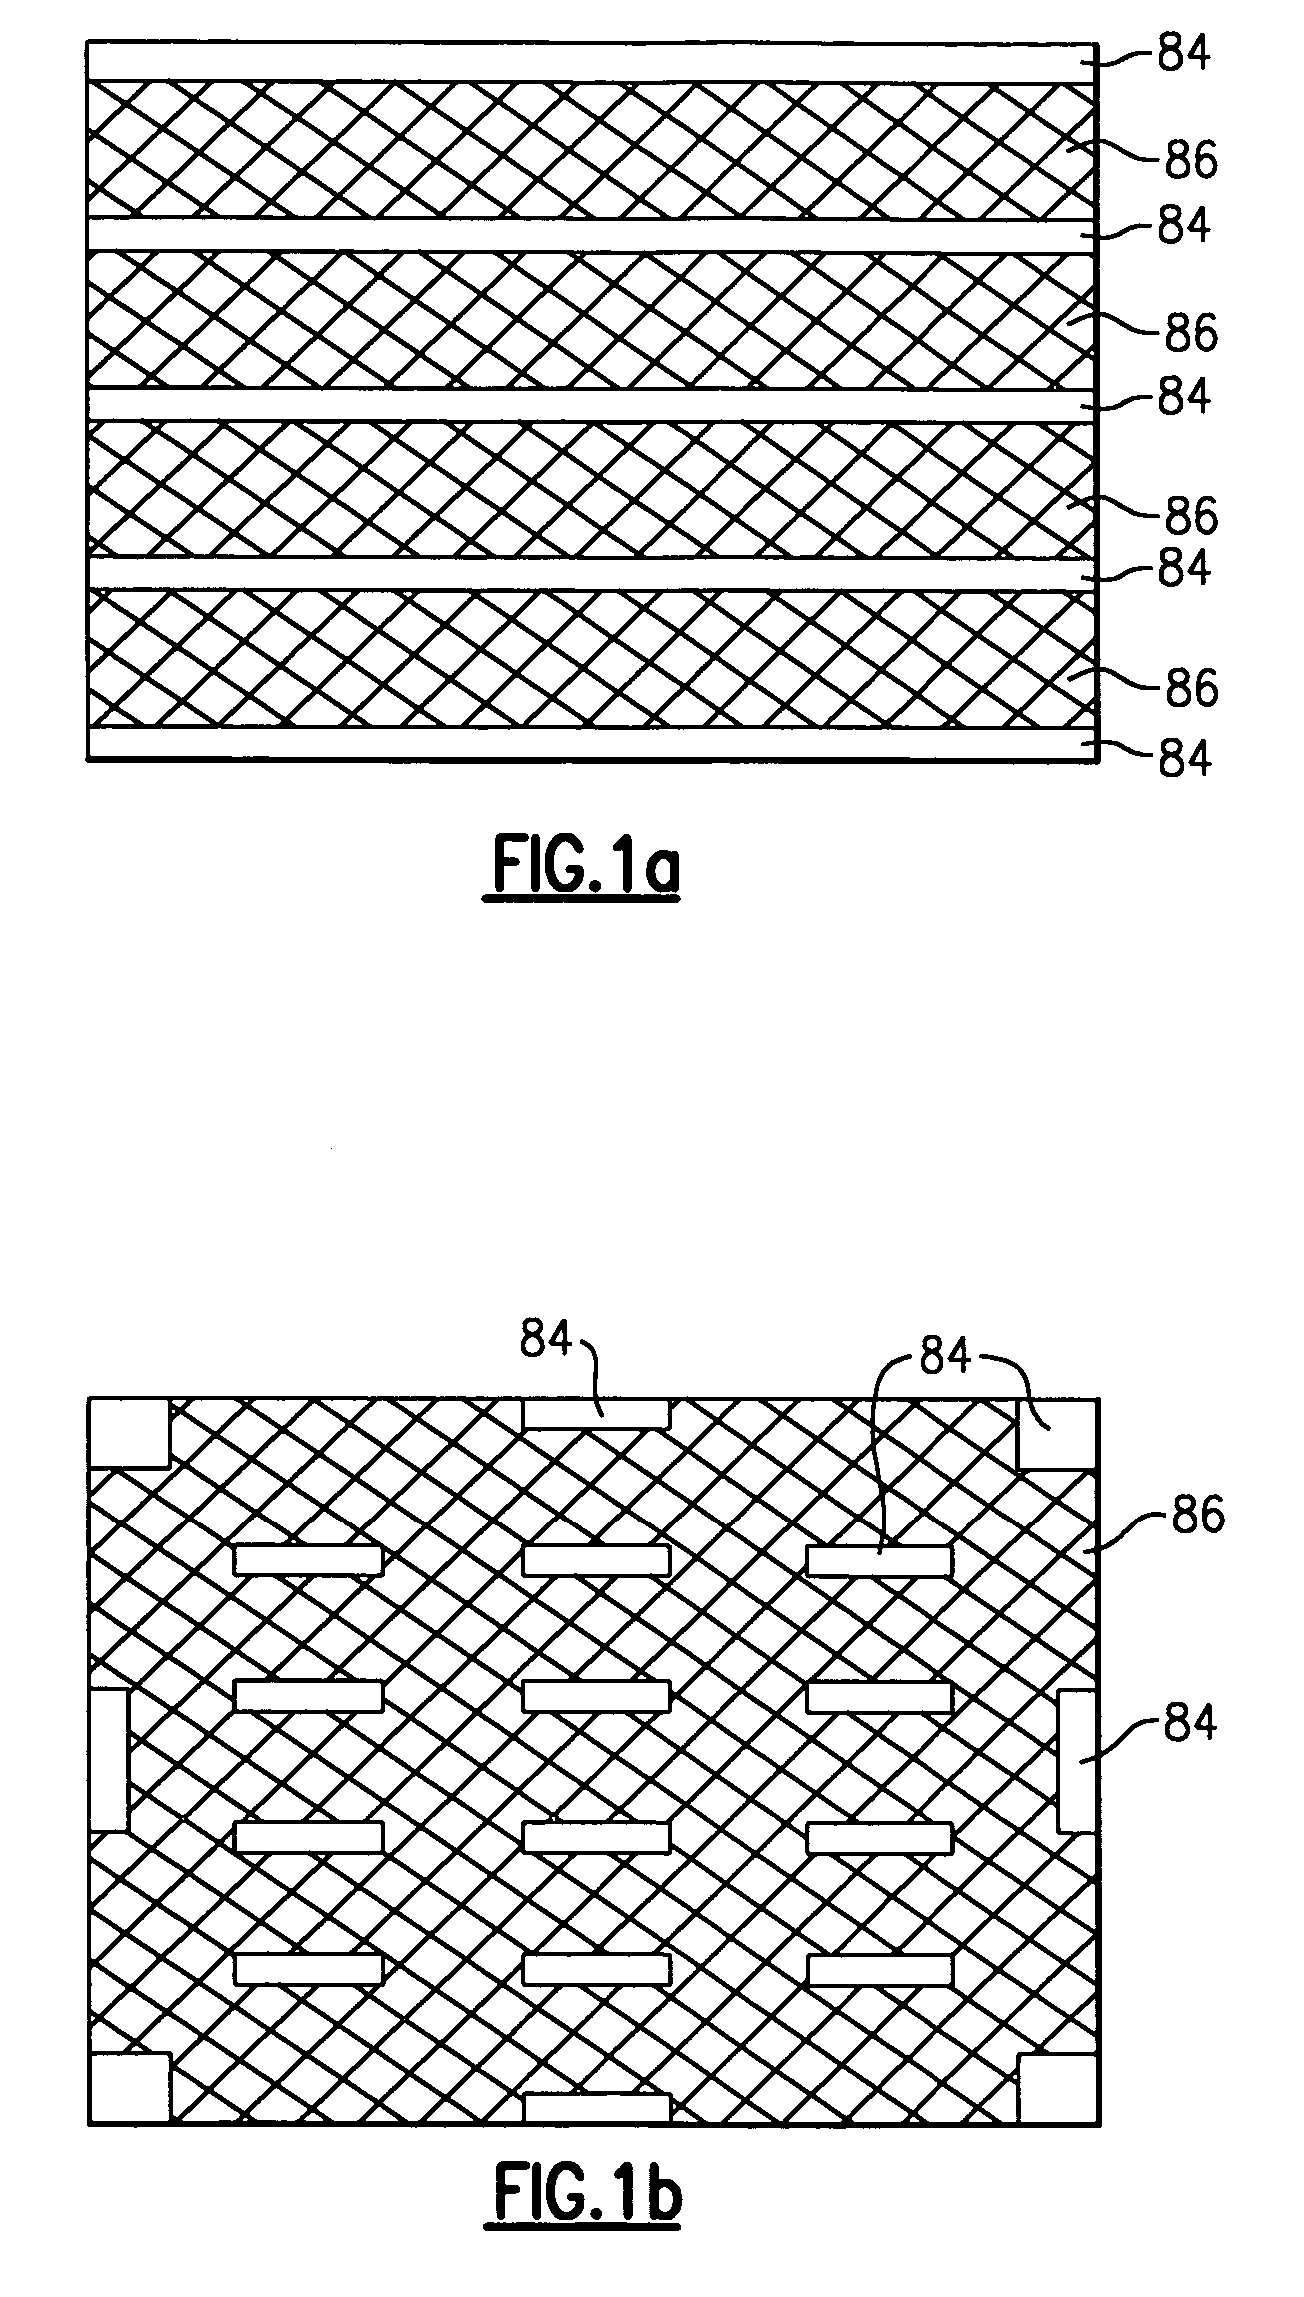 Bar code reading device having partial frame image capture operating mode